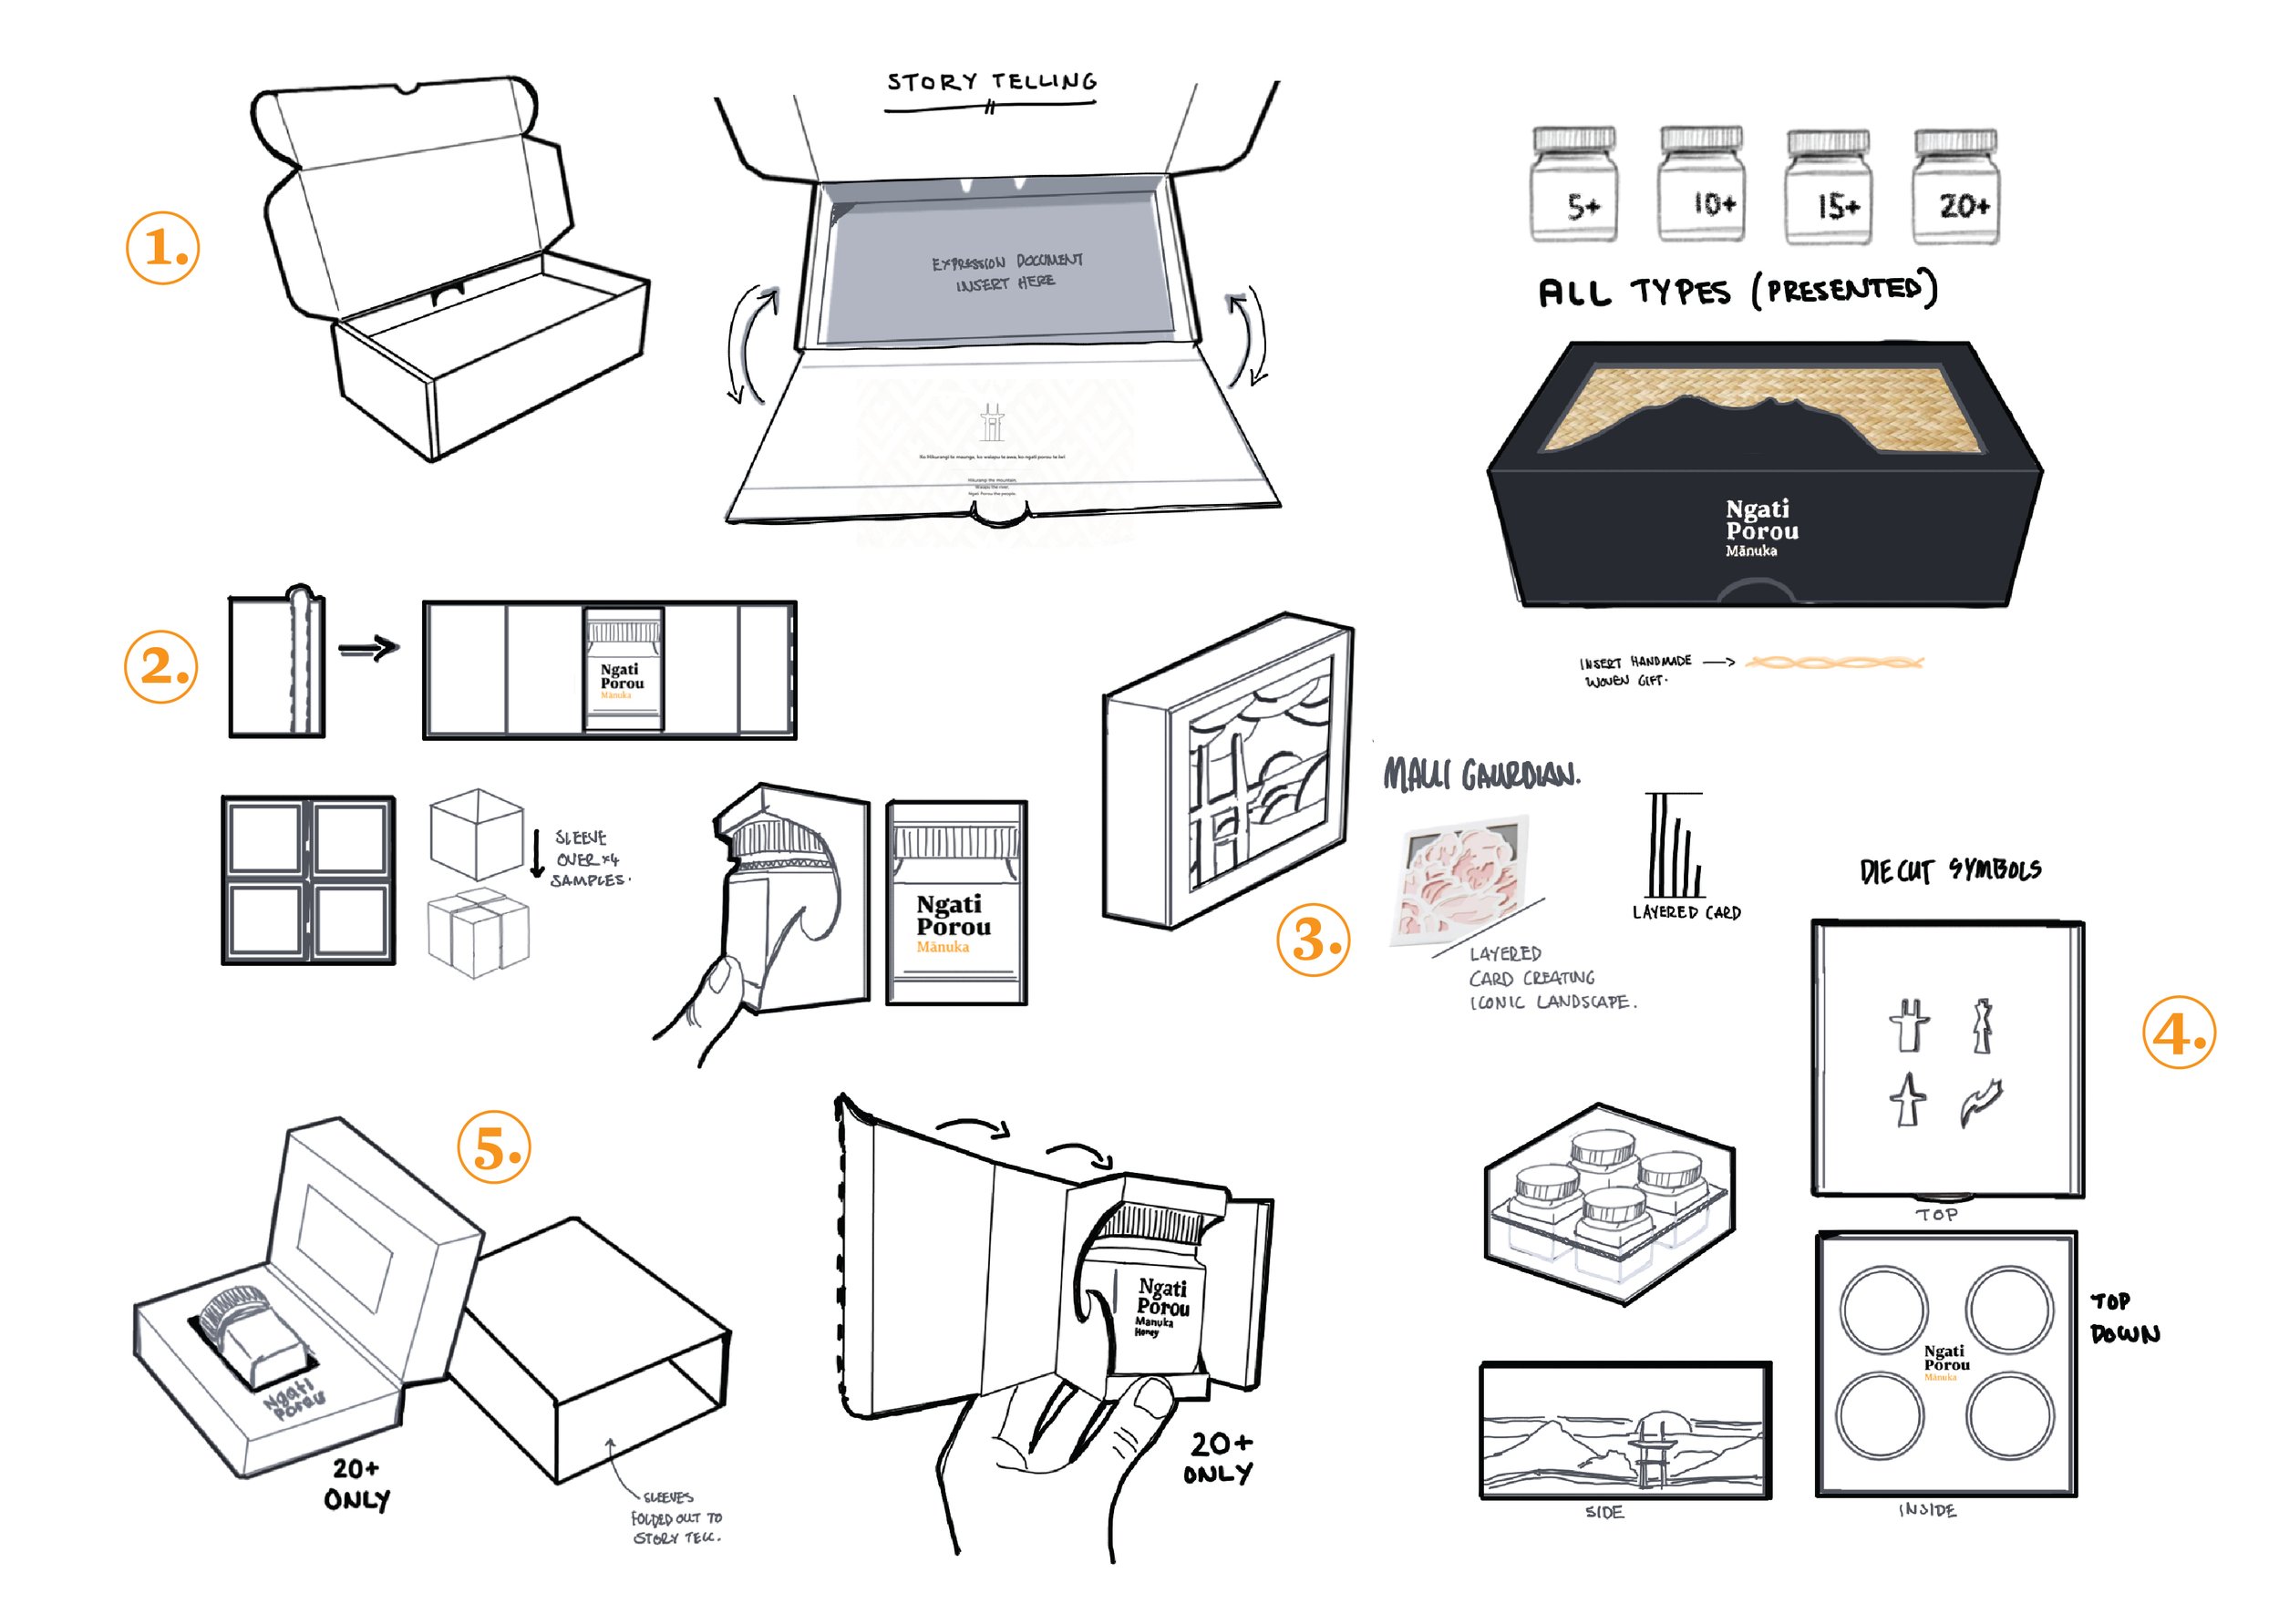 Virtuo_NP_Packaging_Concepts_v2_Lay up 1 copy.jpg